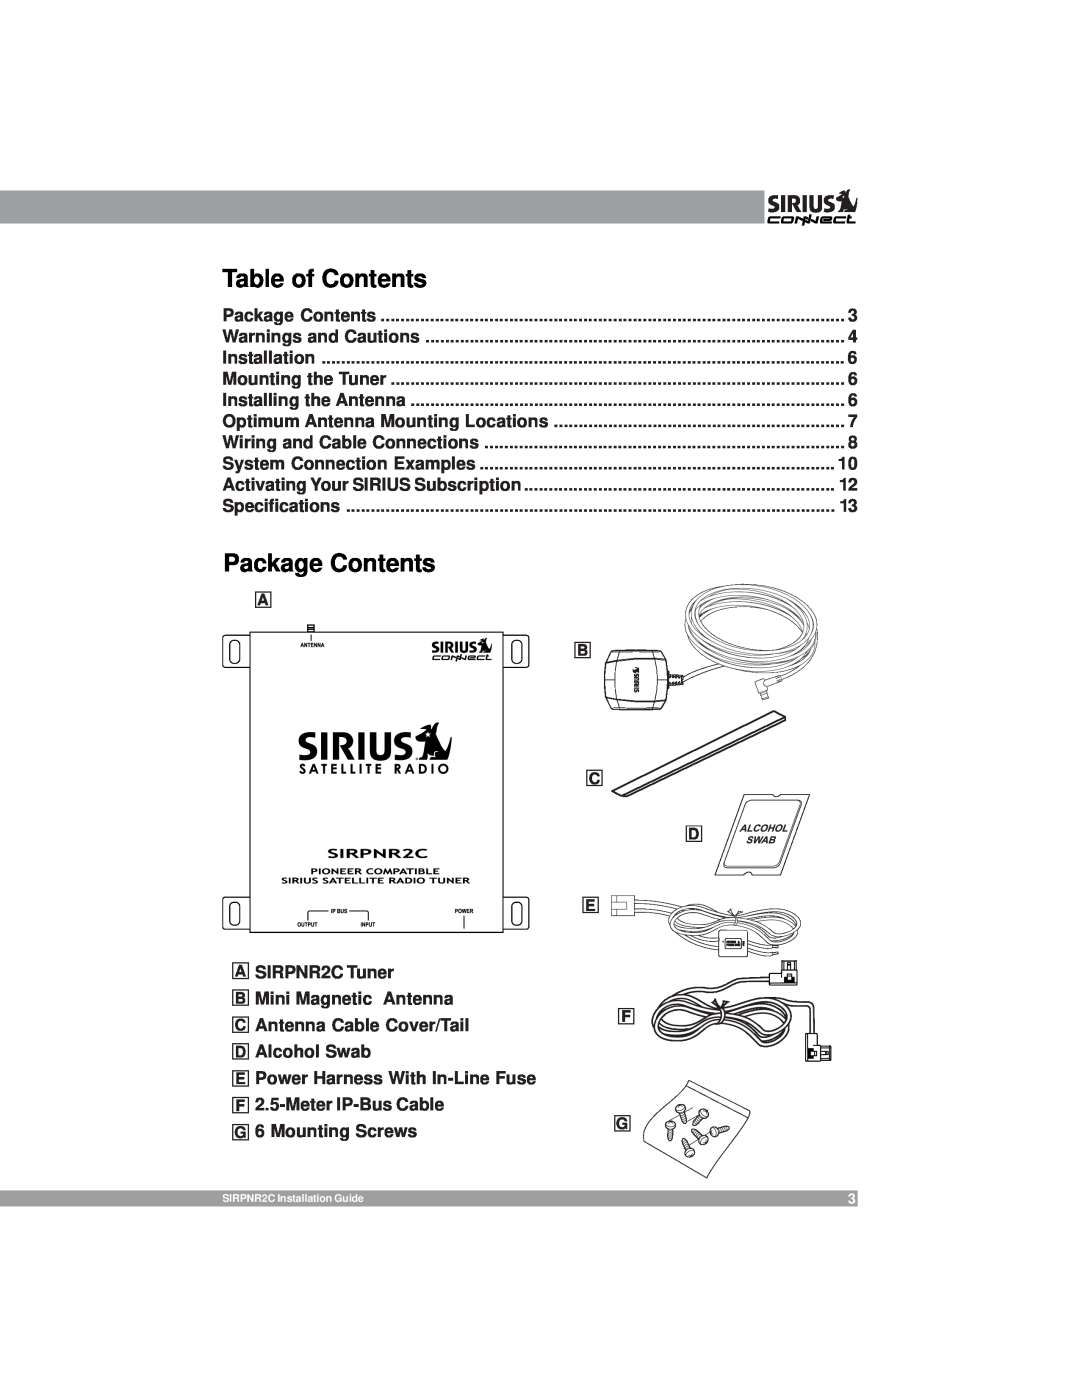 Sirius Satellite Radio SIRPNR2C manual Package Contents, Table of Contents 